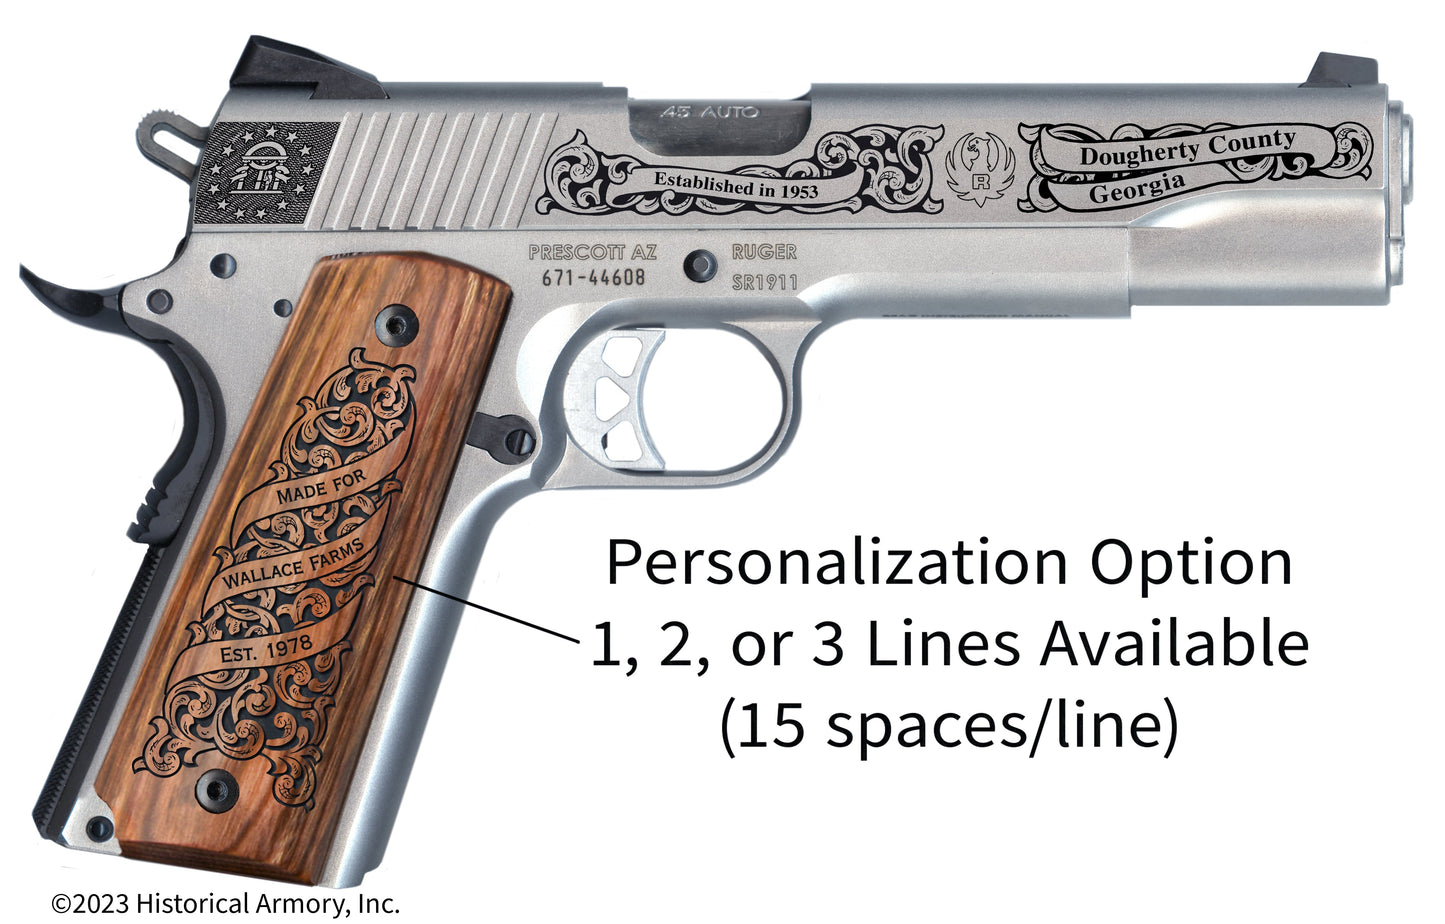 Dougherty County Georgia Personalized Engraved .45 Auto Ruger 1911